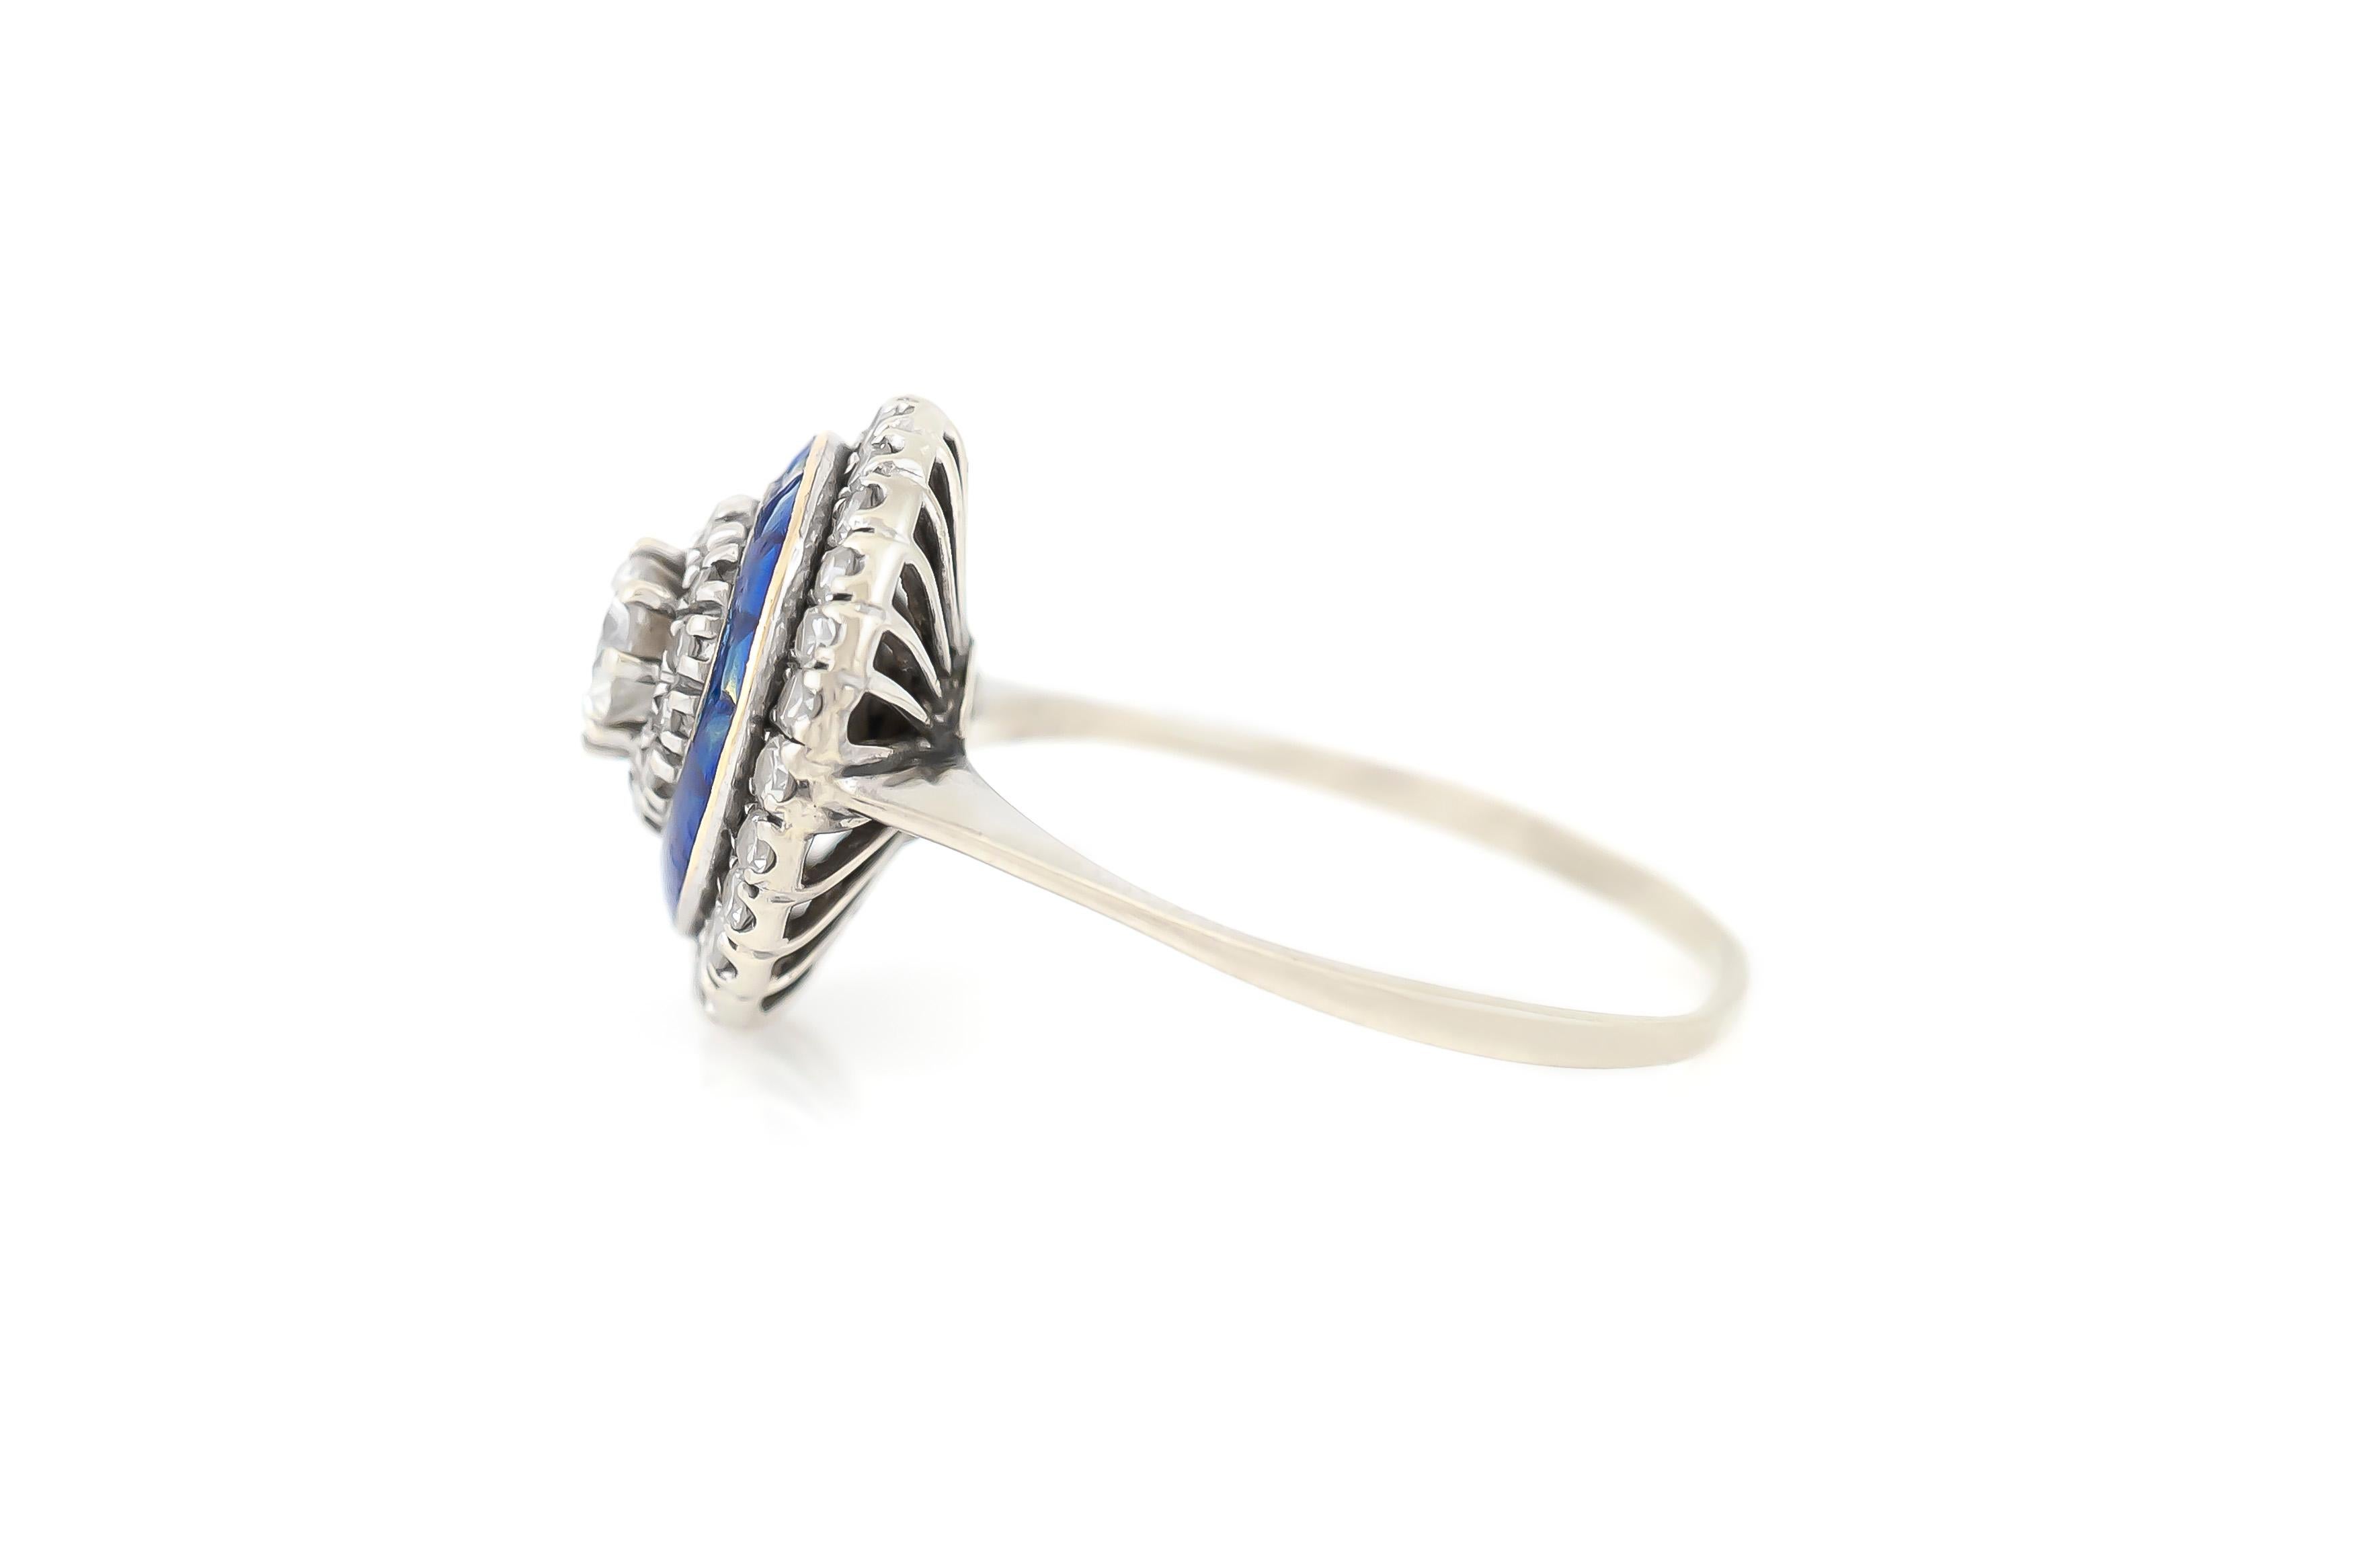 Orbicular Diamonds with Blue Enamel on 18 Karat White Gold Ring In Excellent Condition For Sale In New York, NY